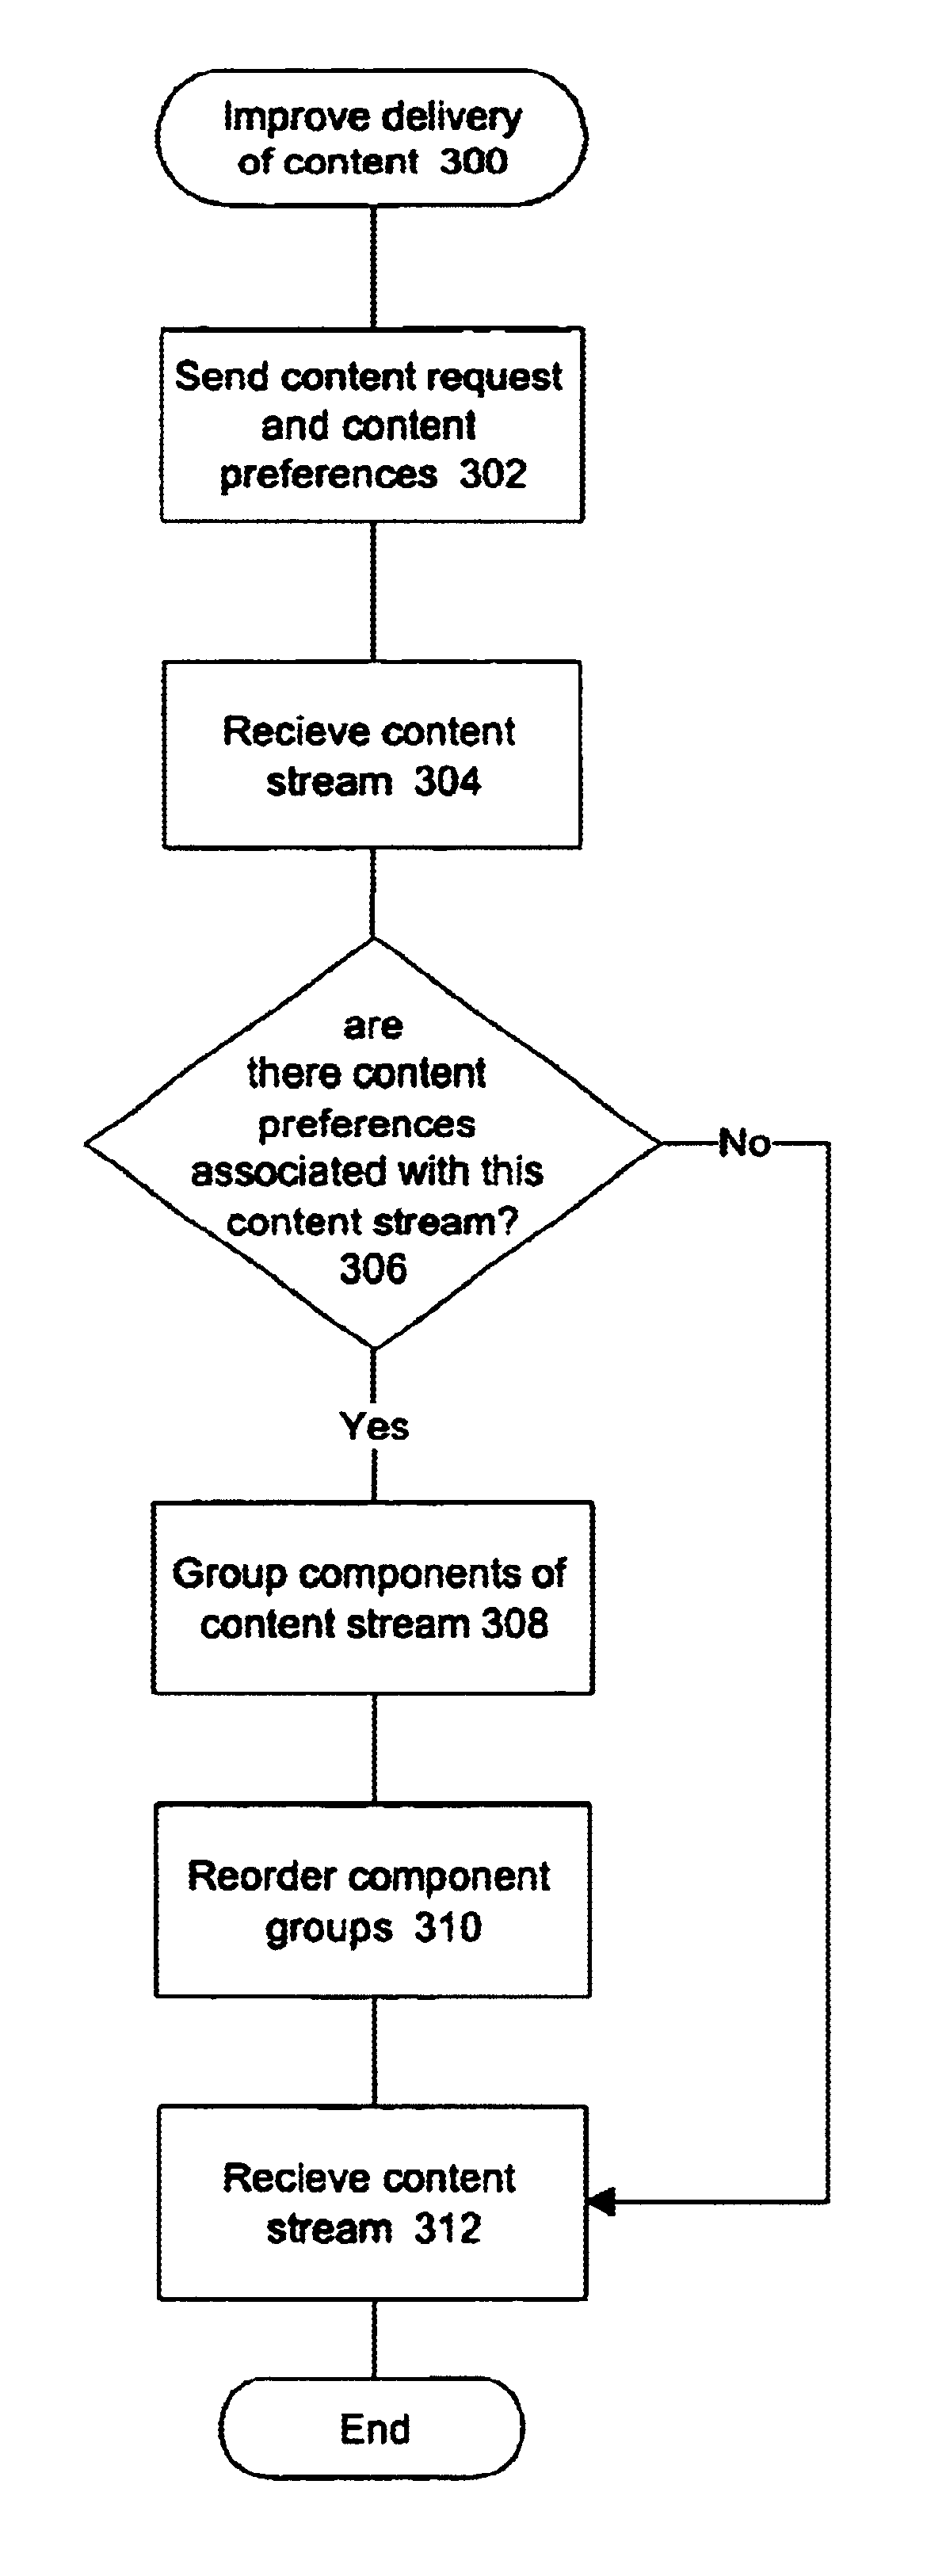 System for improving delivery of content by reordering after grouping components homogeneously within content stream based upon categories defined by content preferences